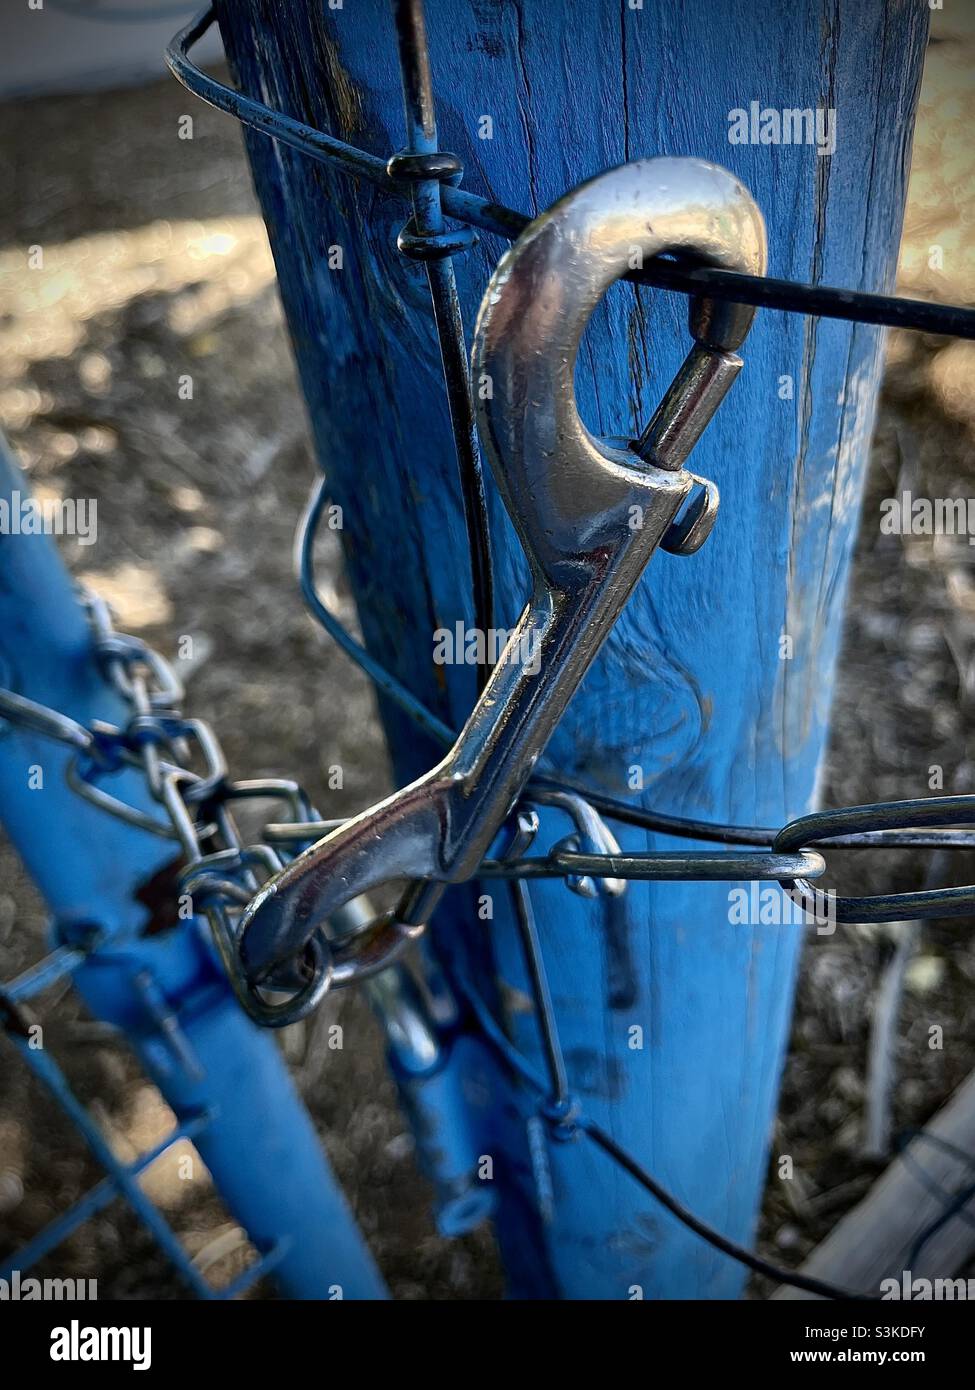 https://c8.alamy.com/comp/S3KDFY/up-close-image-of-a-double-end-snap-hook-clip-securing-a-blue-gate-closed-with-chain-and-wire-to-a-blue-post-S3KDFY.jpg